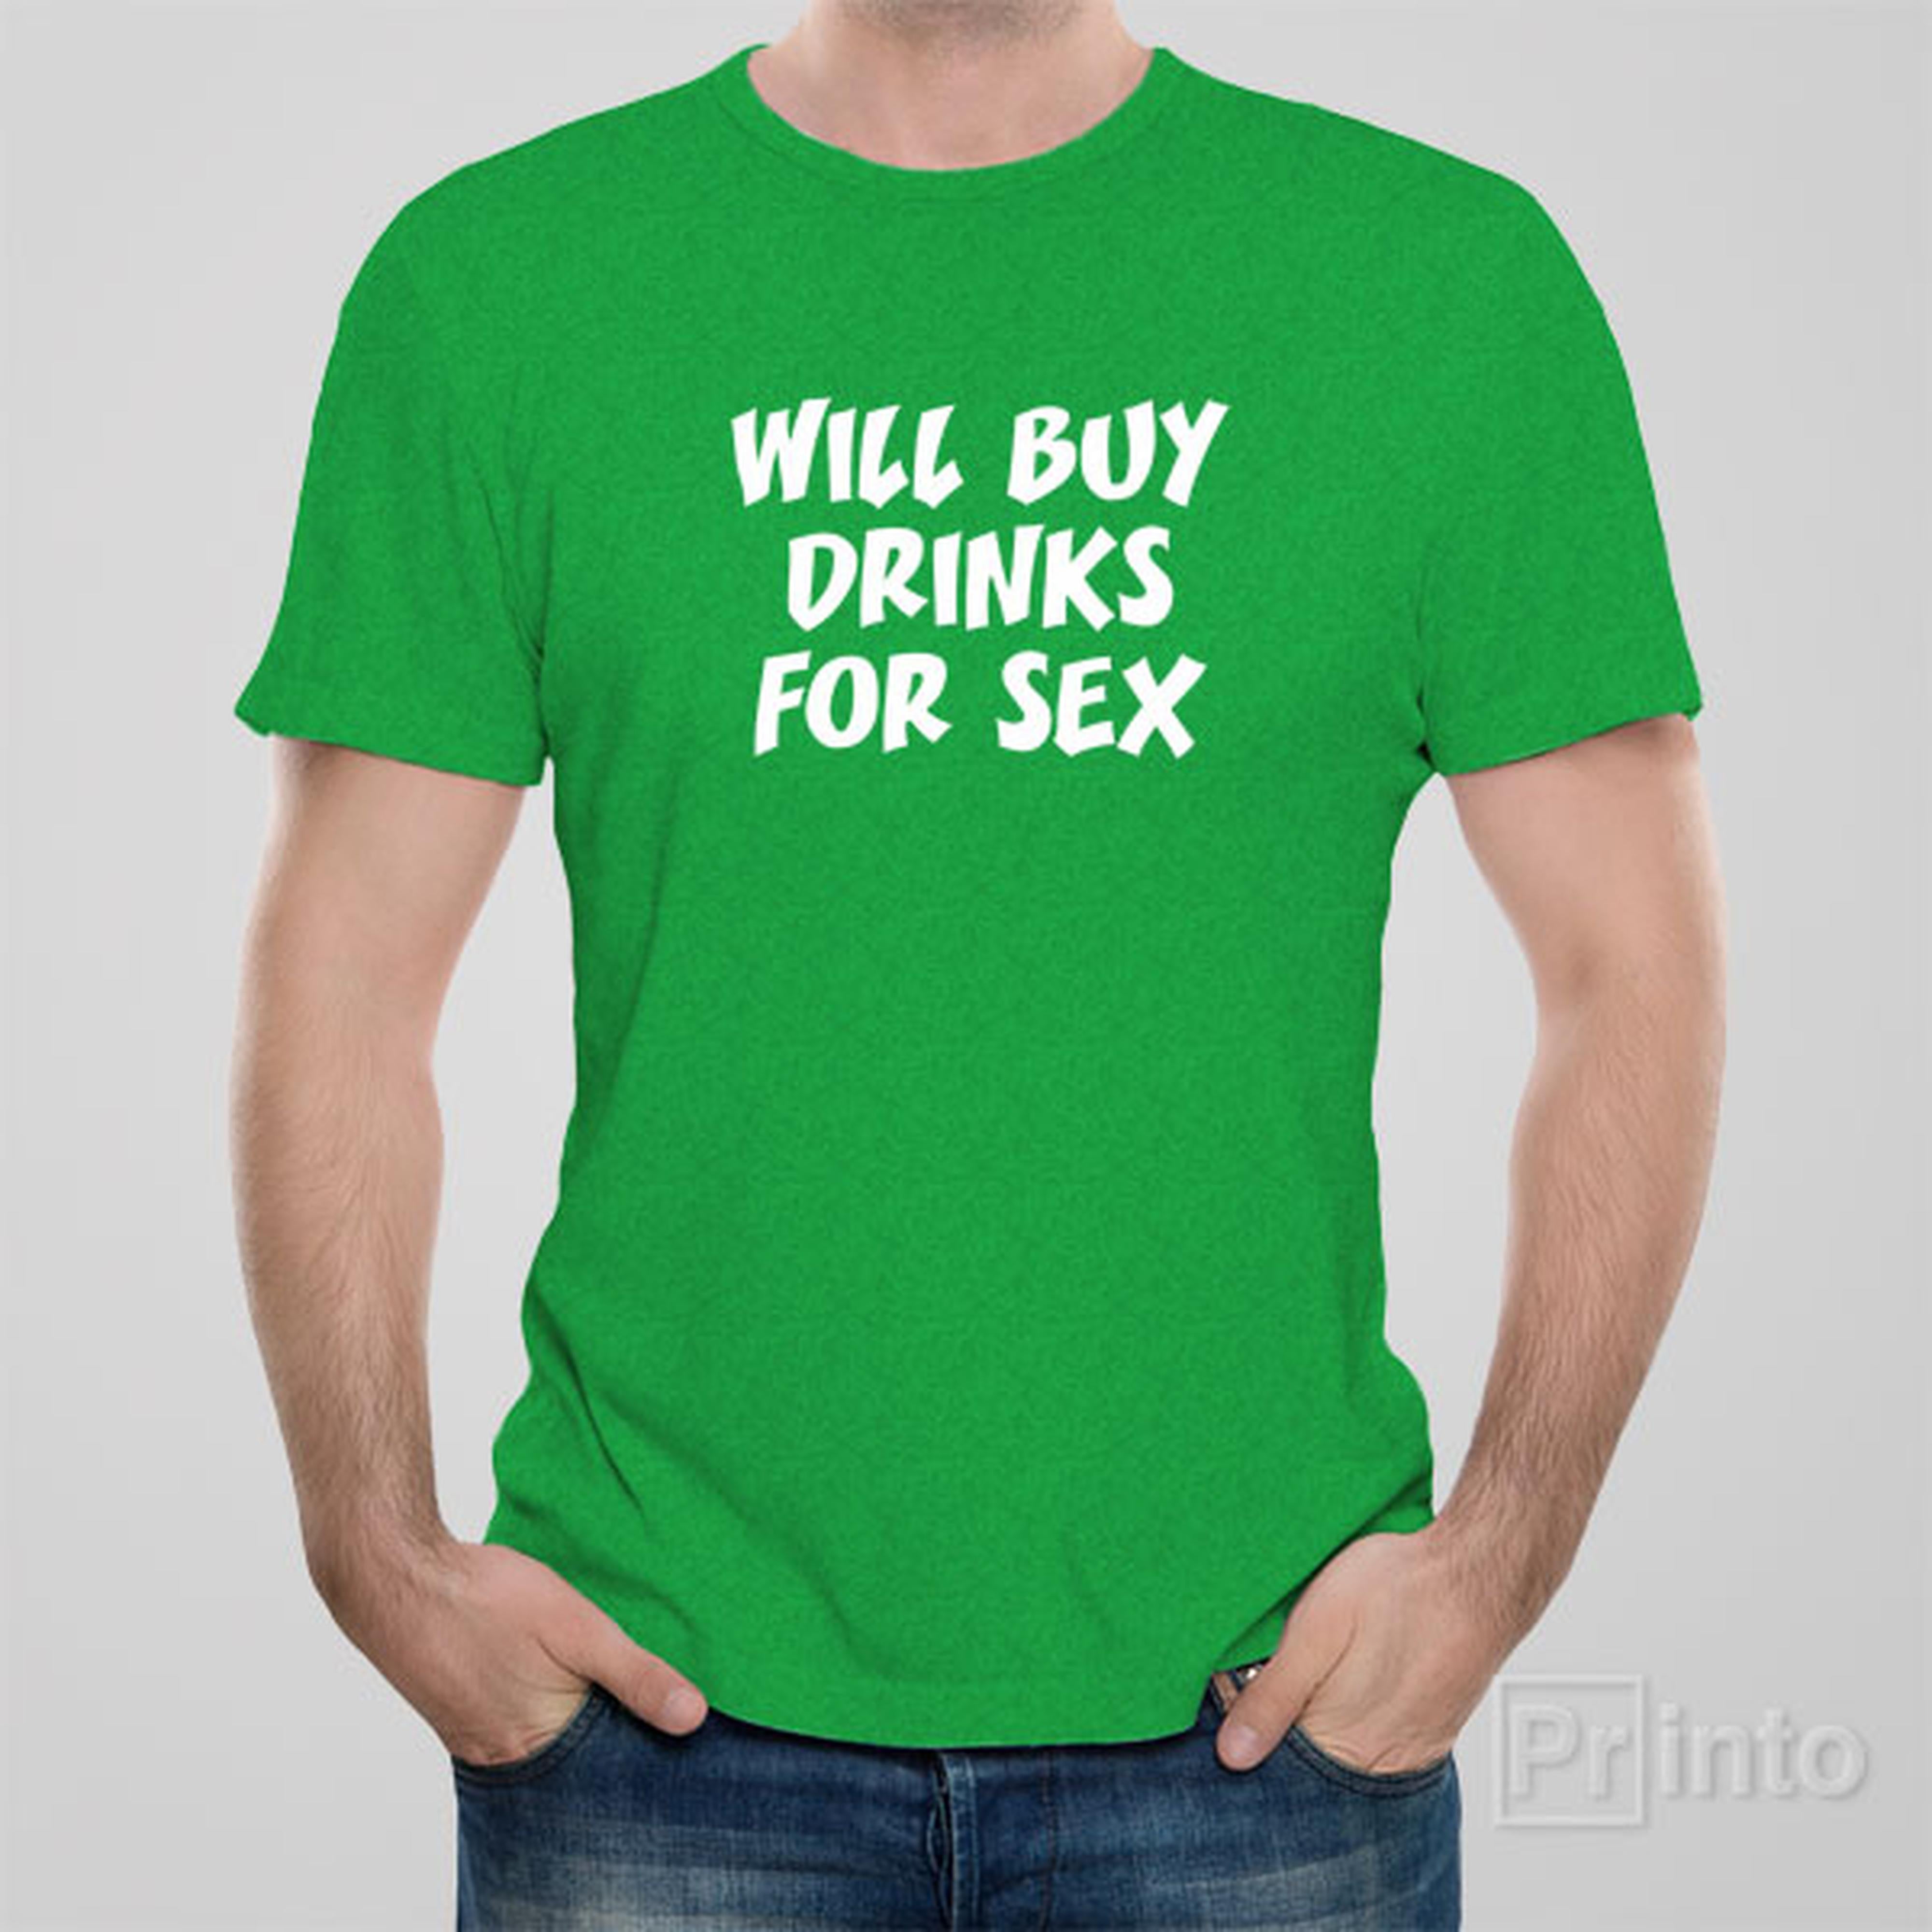 will-buy-drinks-for-sex